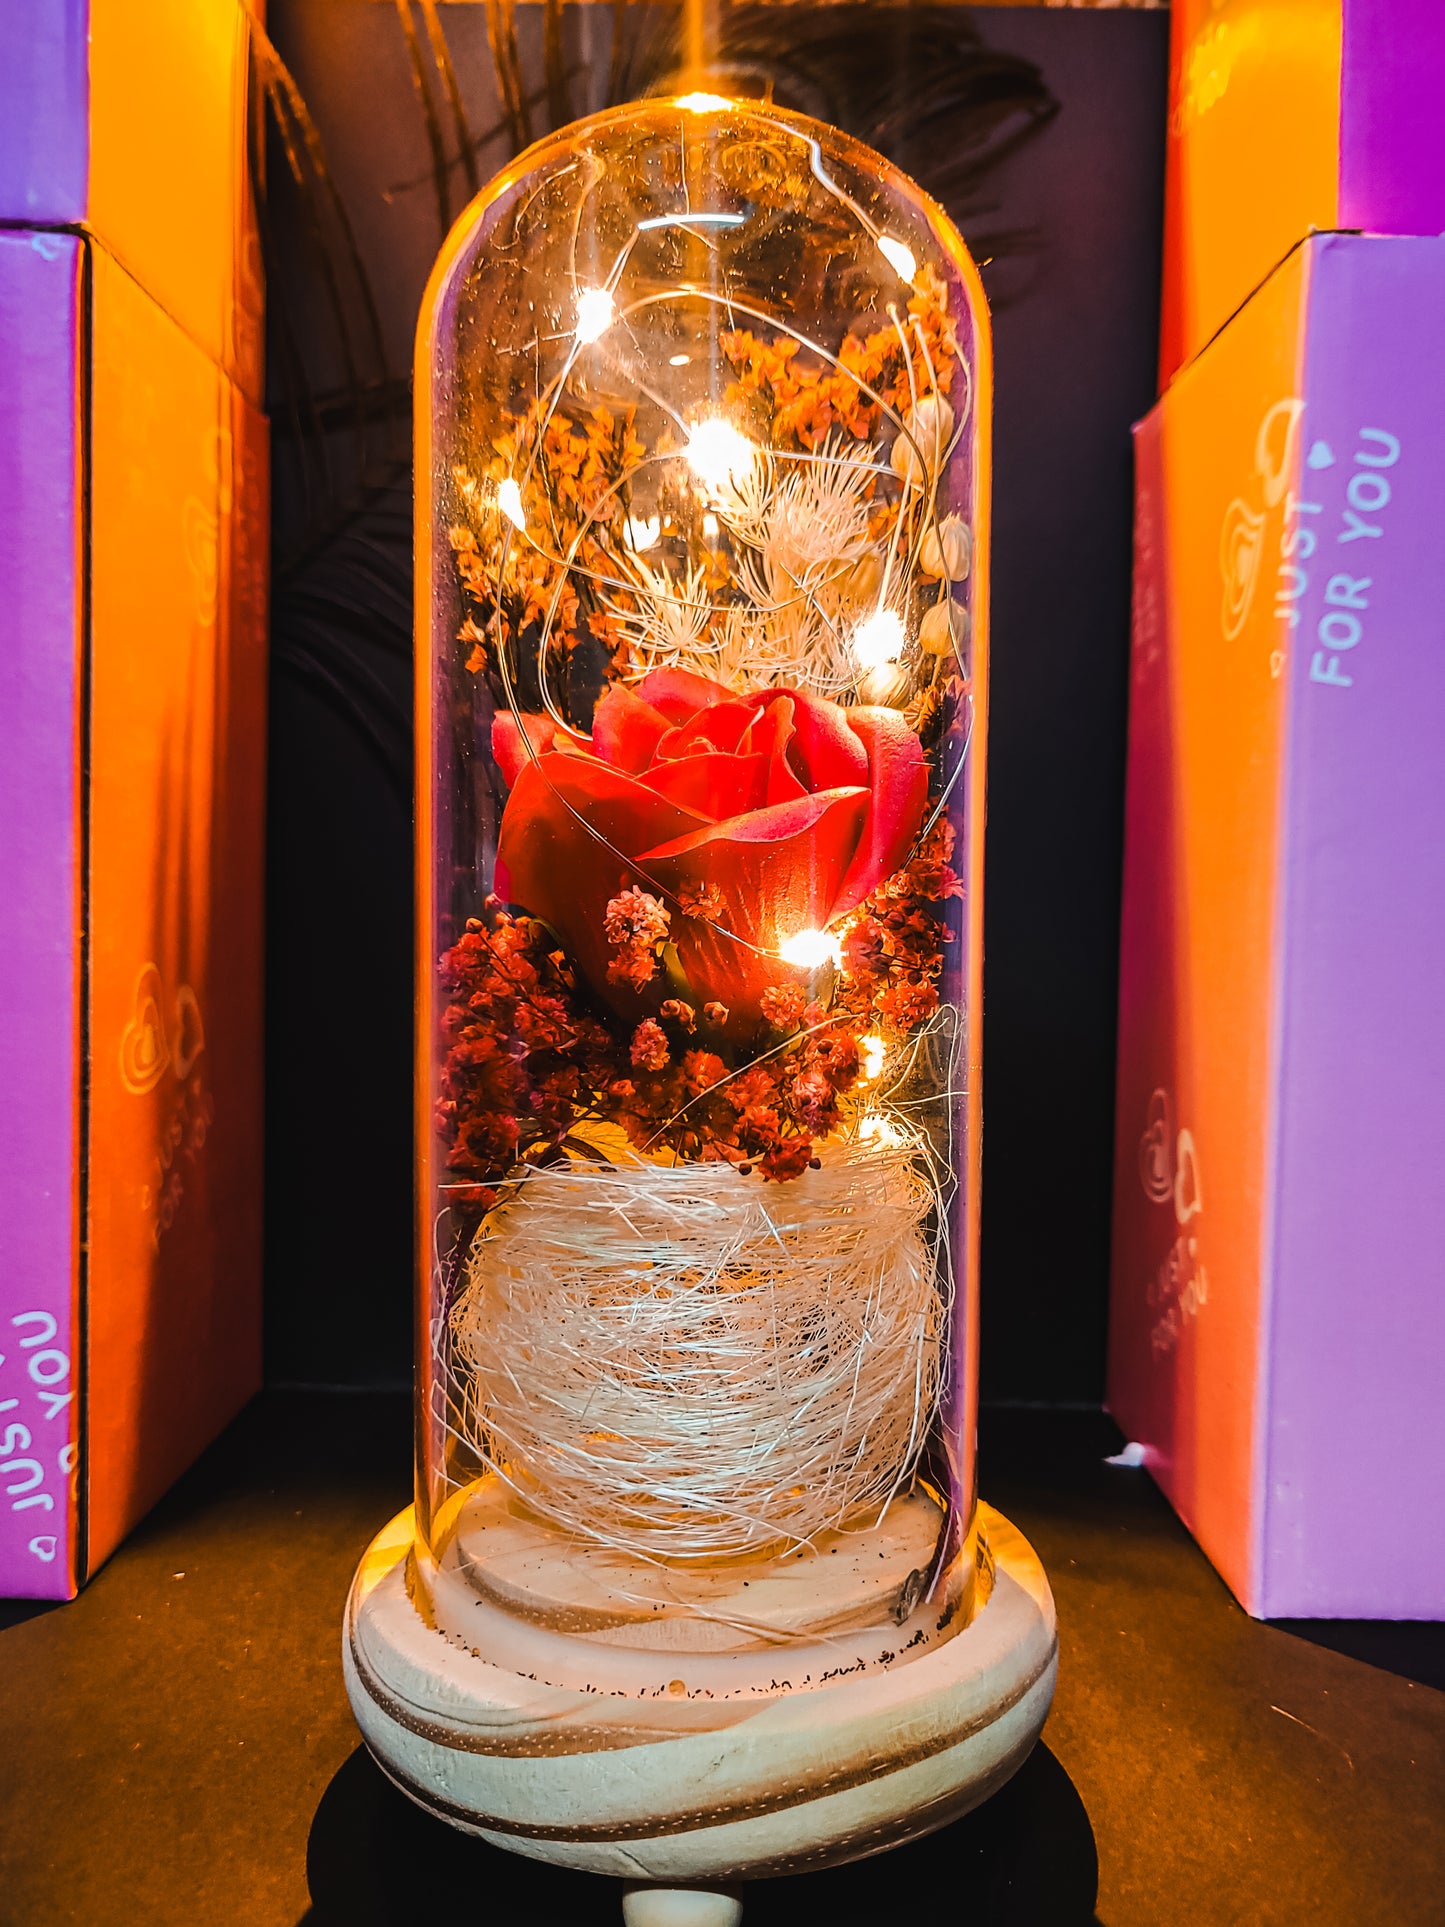 Peserved flowers in bell jar with fairy lights  Romantic Gifts for Valentine's Day Mother's Day Birthday Decor50% OFF